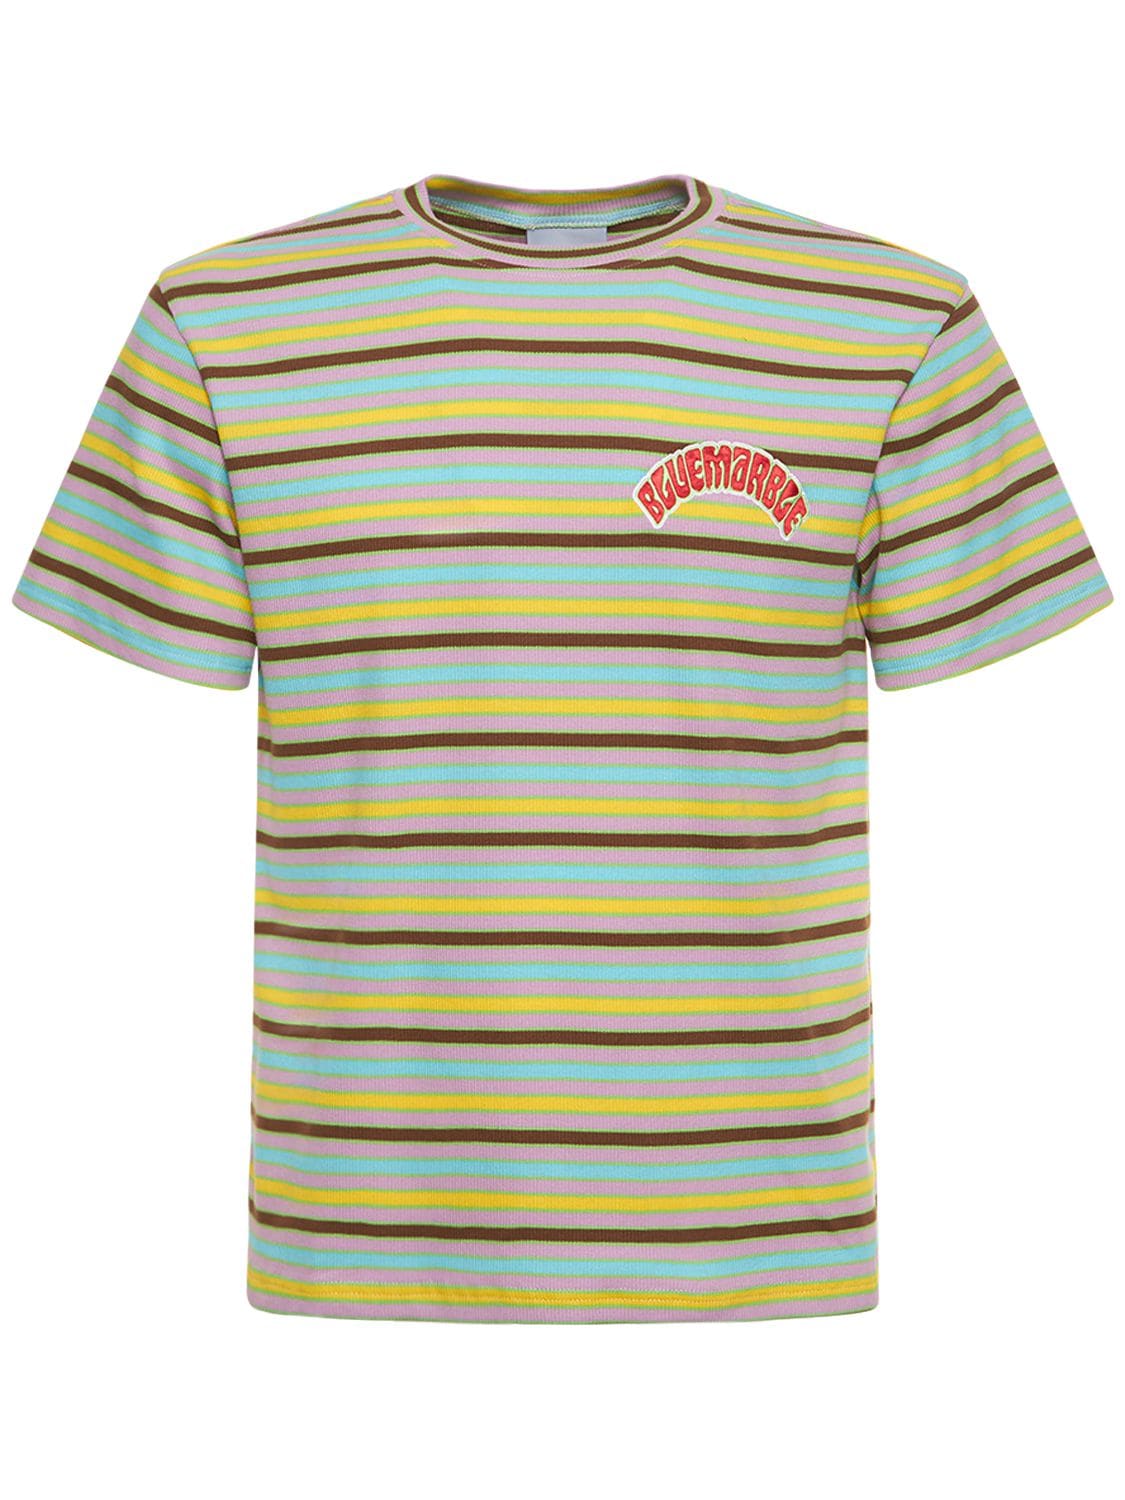 Bluemarble Striped Bowling Cotton T-shirt In Multicolor